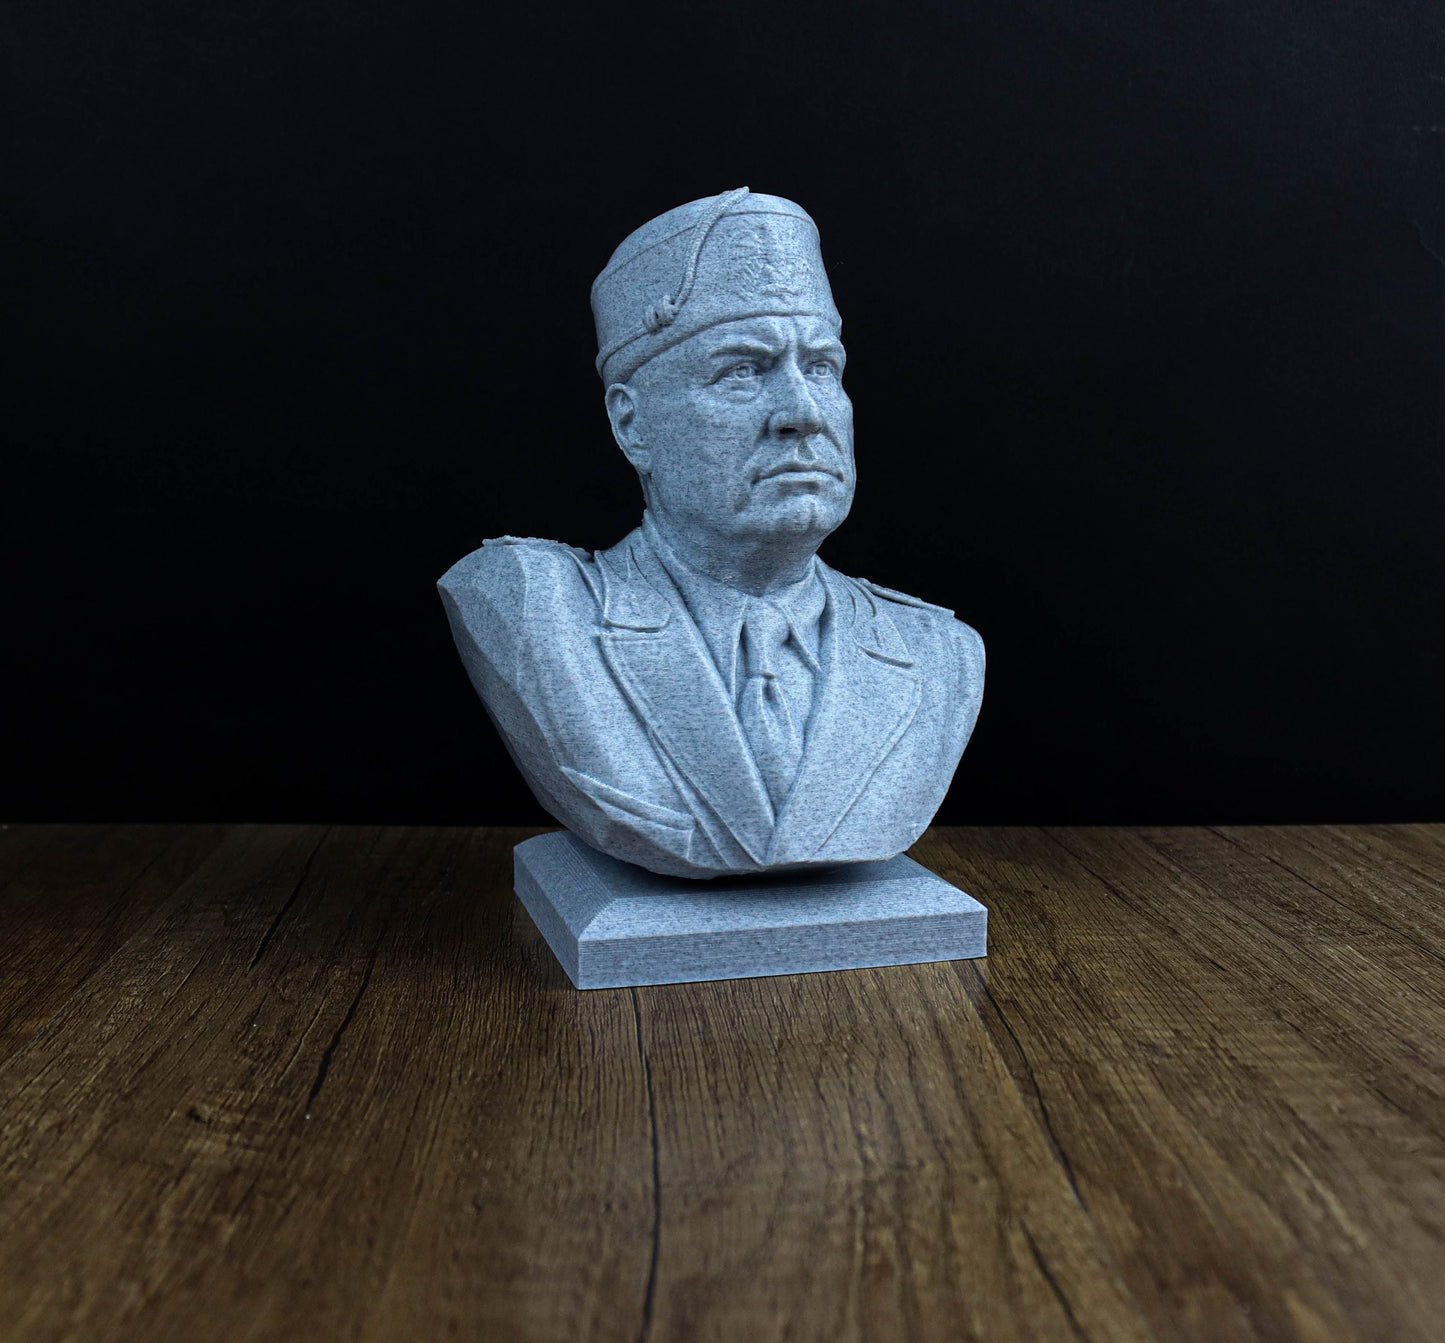 Benito Mussolini Bust, Il Duce Statue, Former Prime Minister of Italy